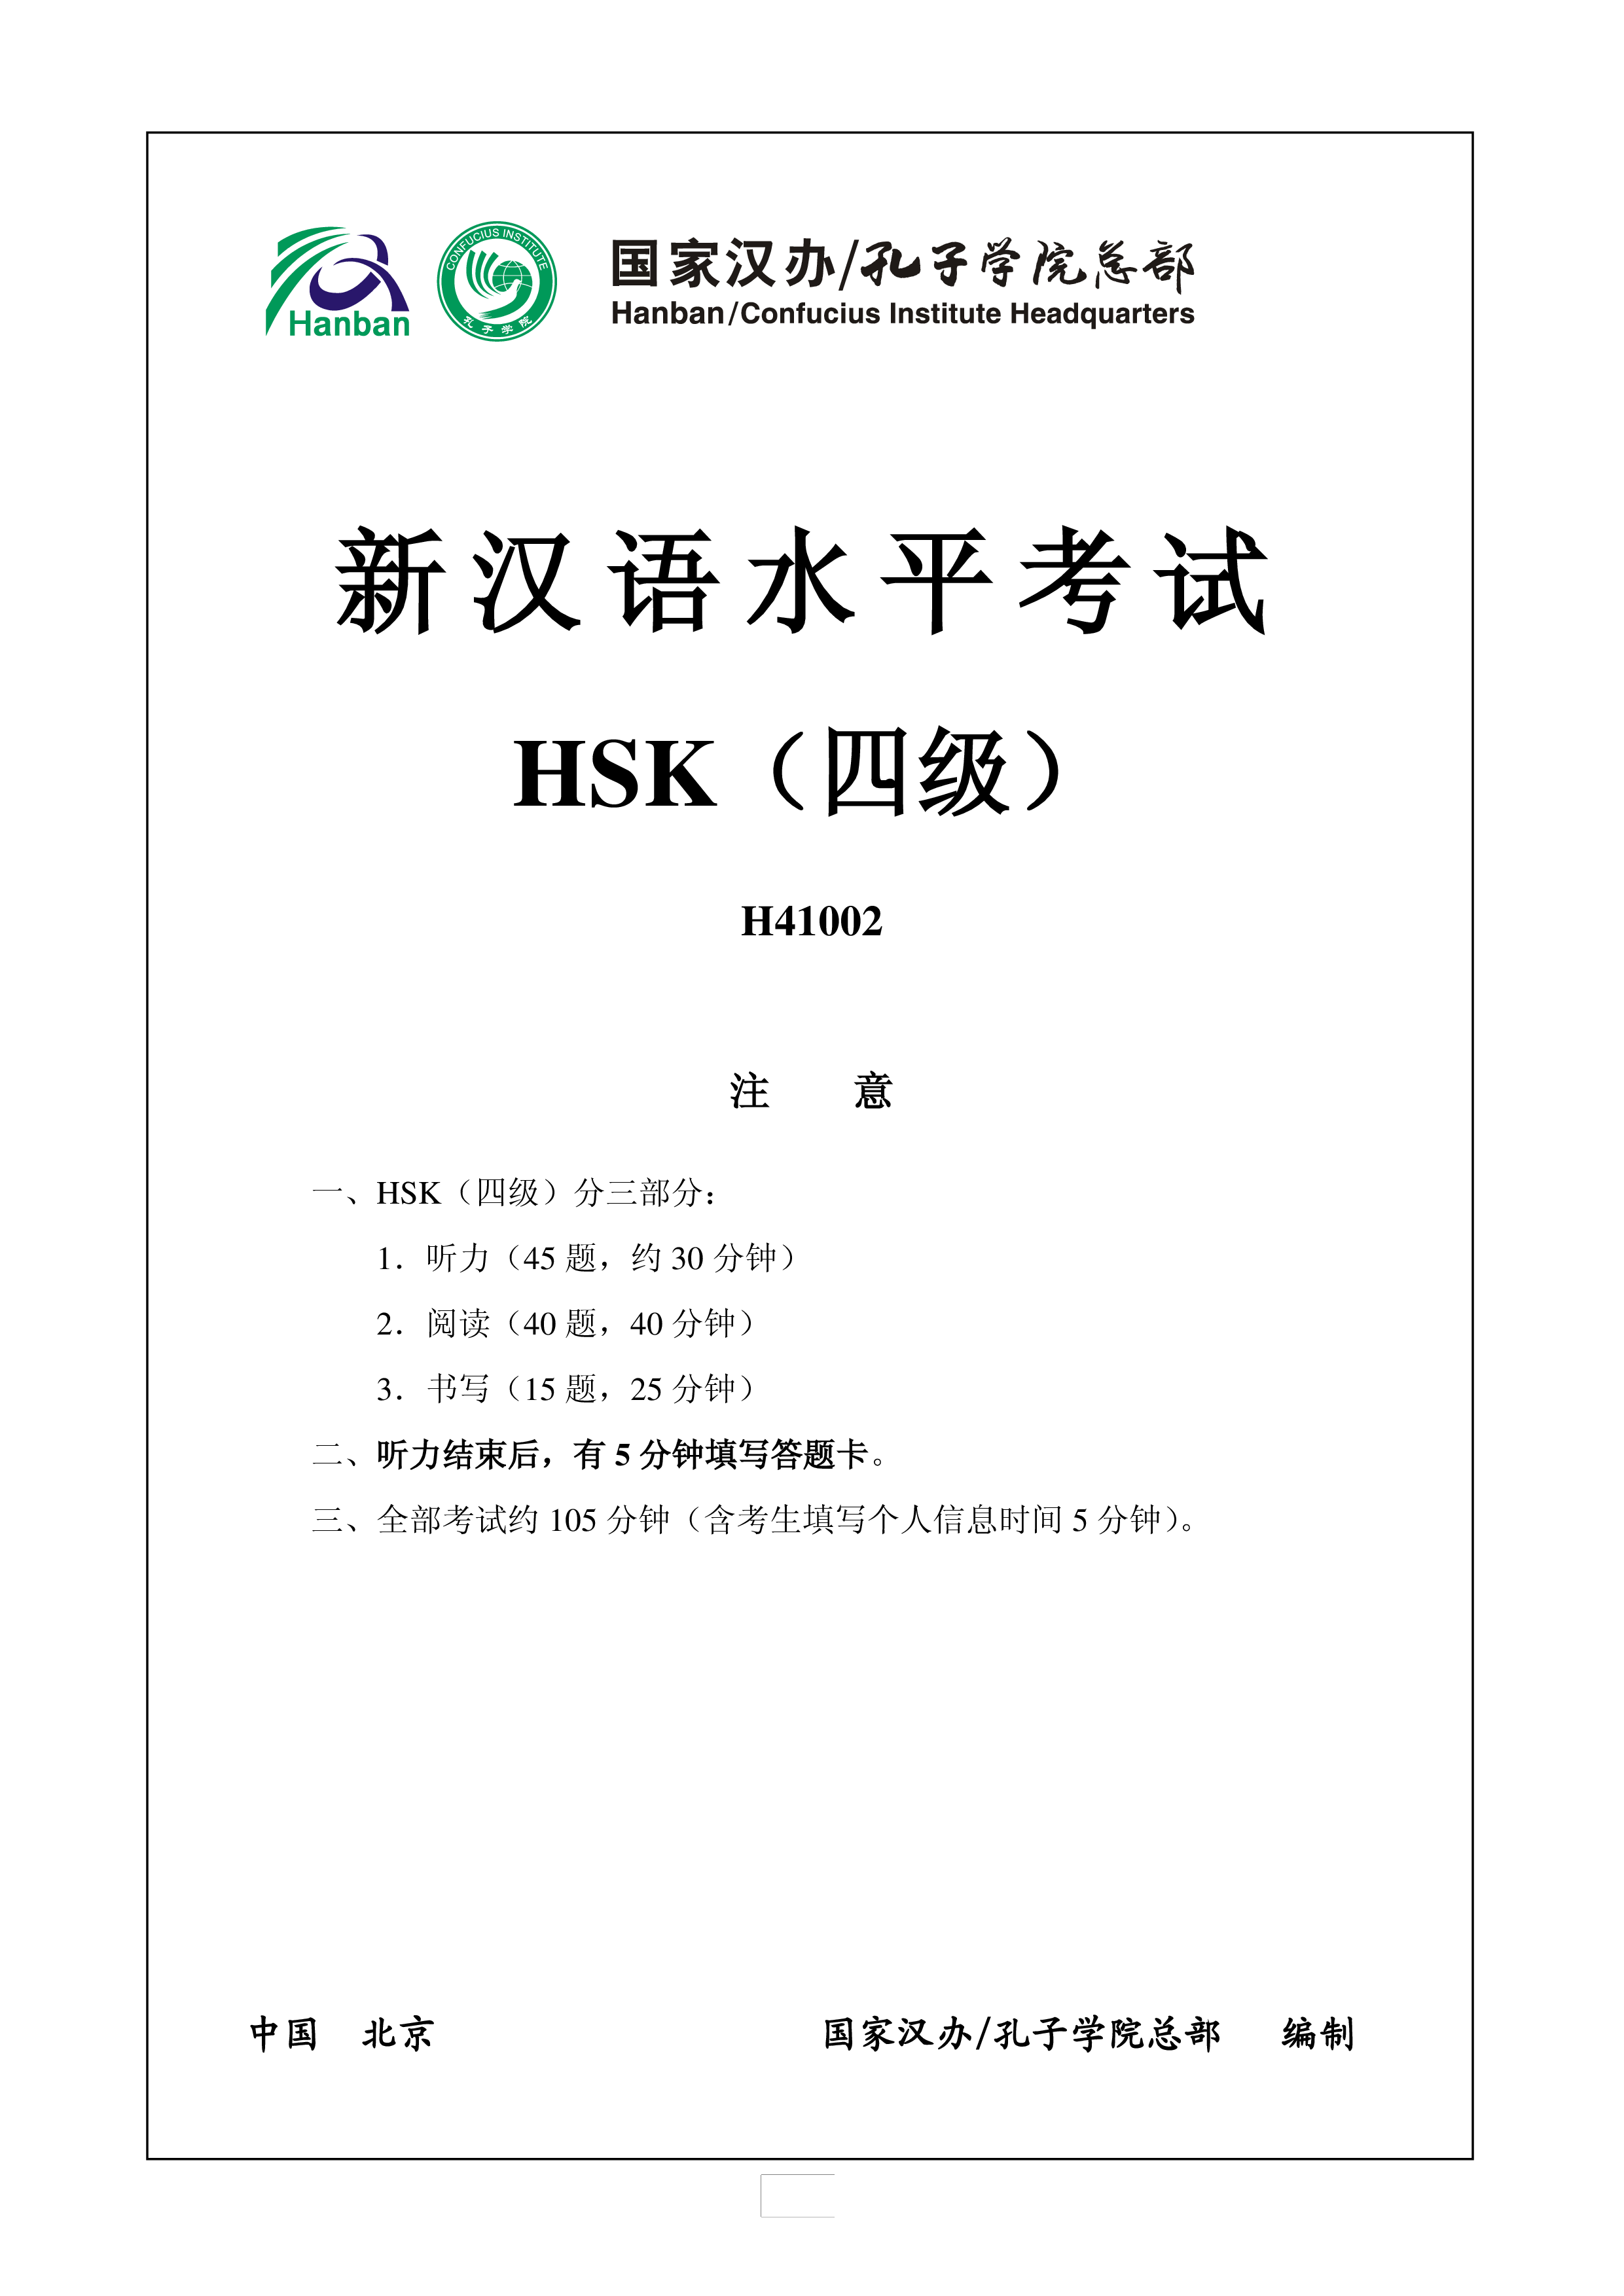 hsk4 chinese exam including answers # hsk h41002 voorbeeld afbeelding 